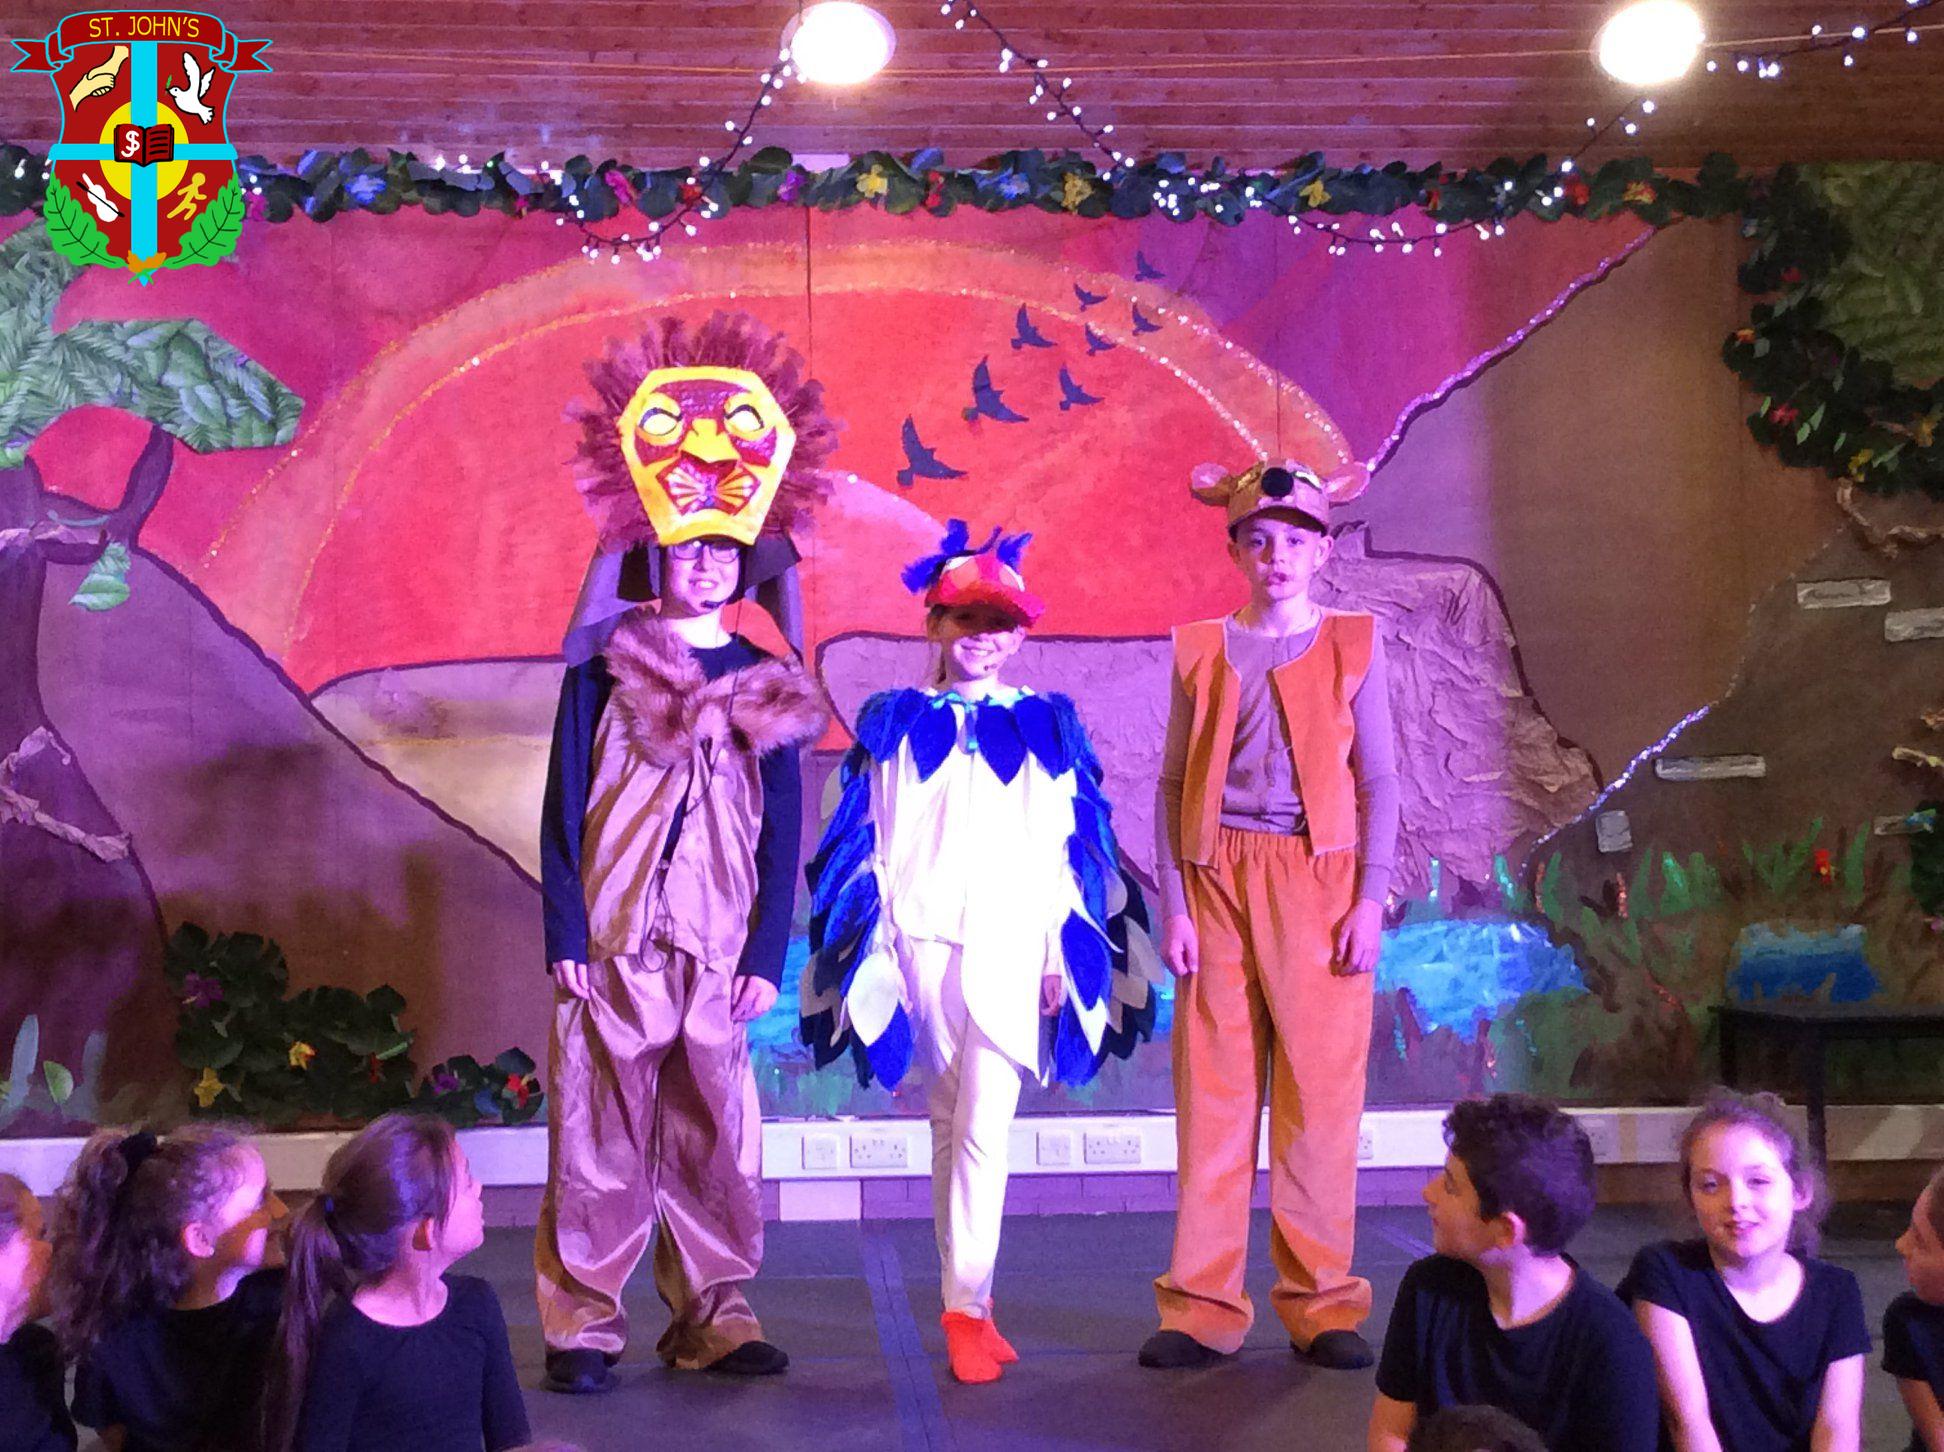 Some from our Lion King dress rehearsal today.